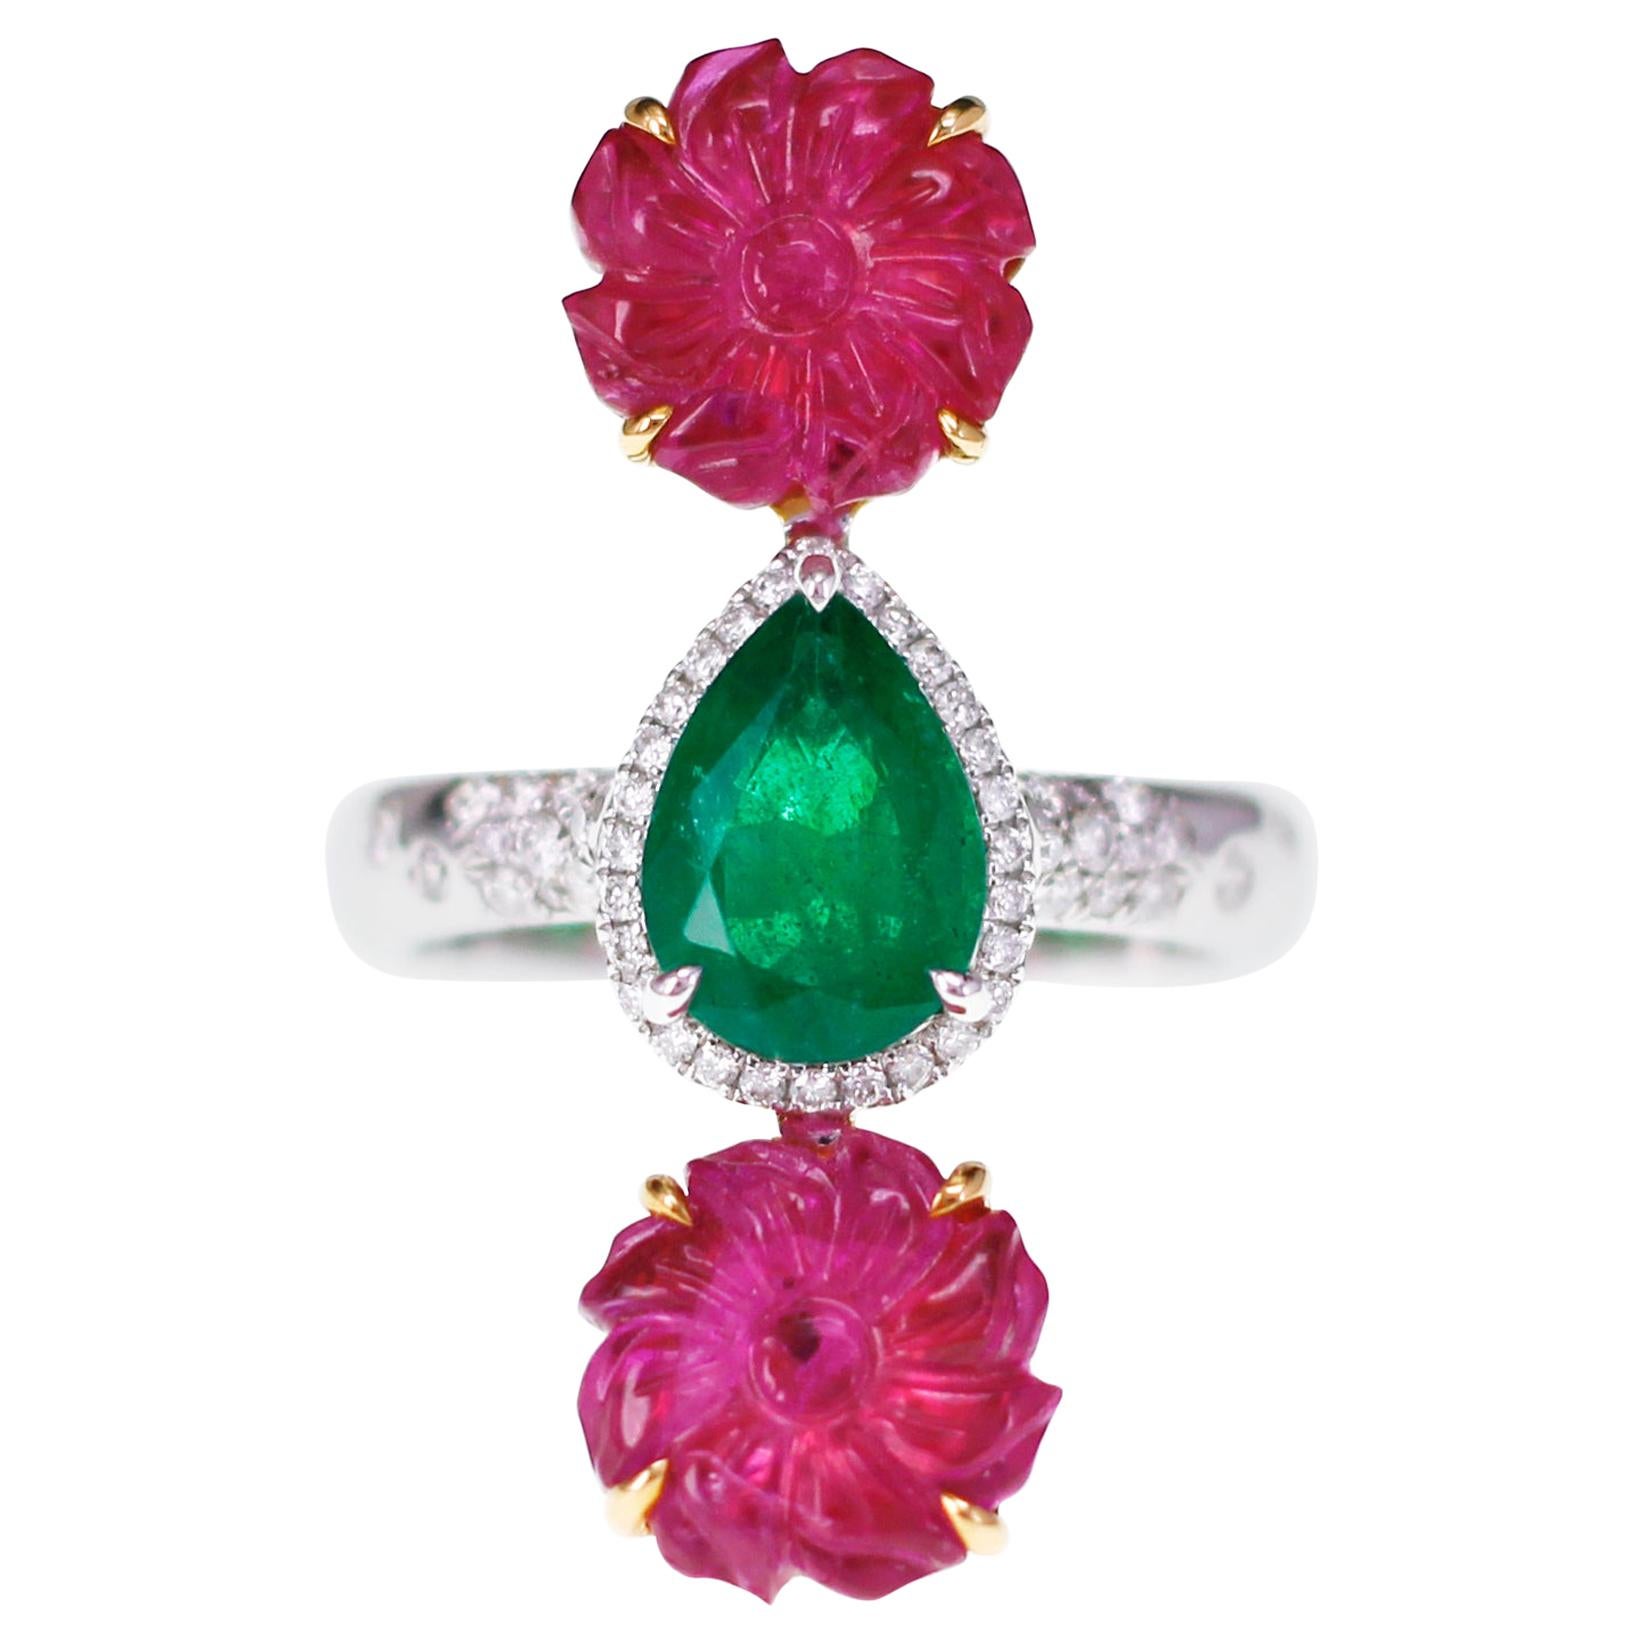 6 Carat Antique Ruby Carving with 1.55 Carat Vivid Green Emerald For Sale